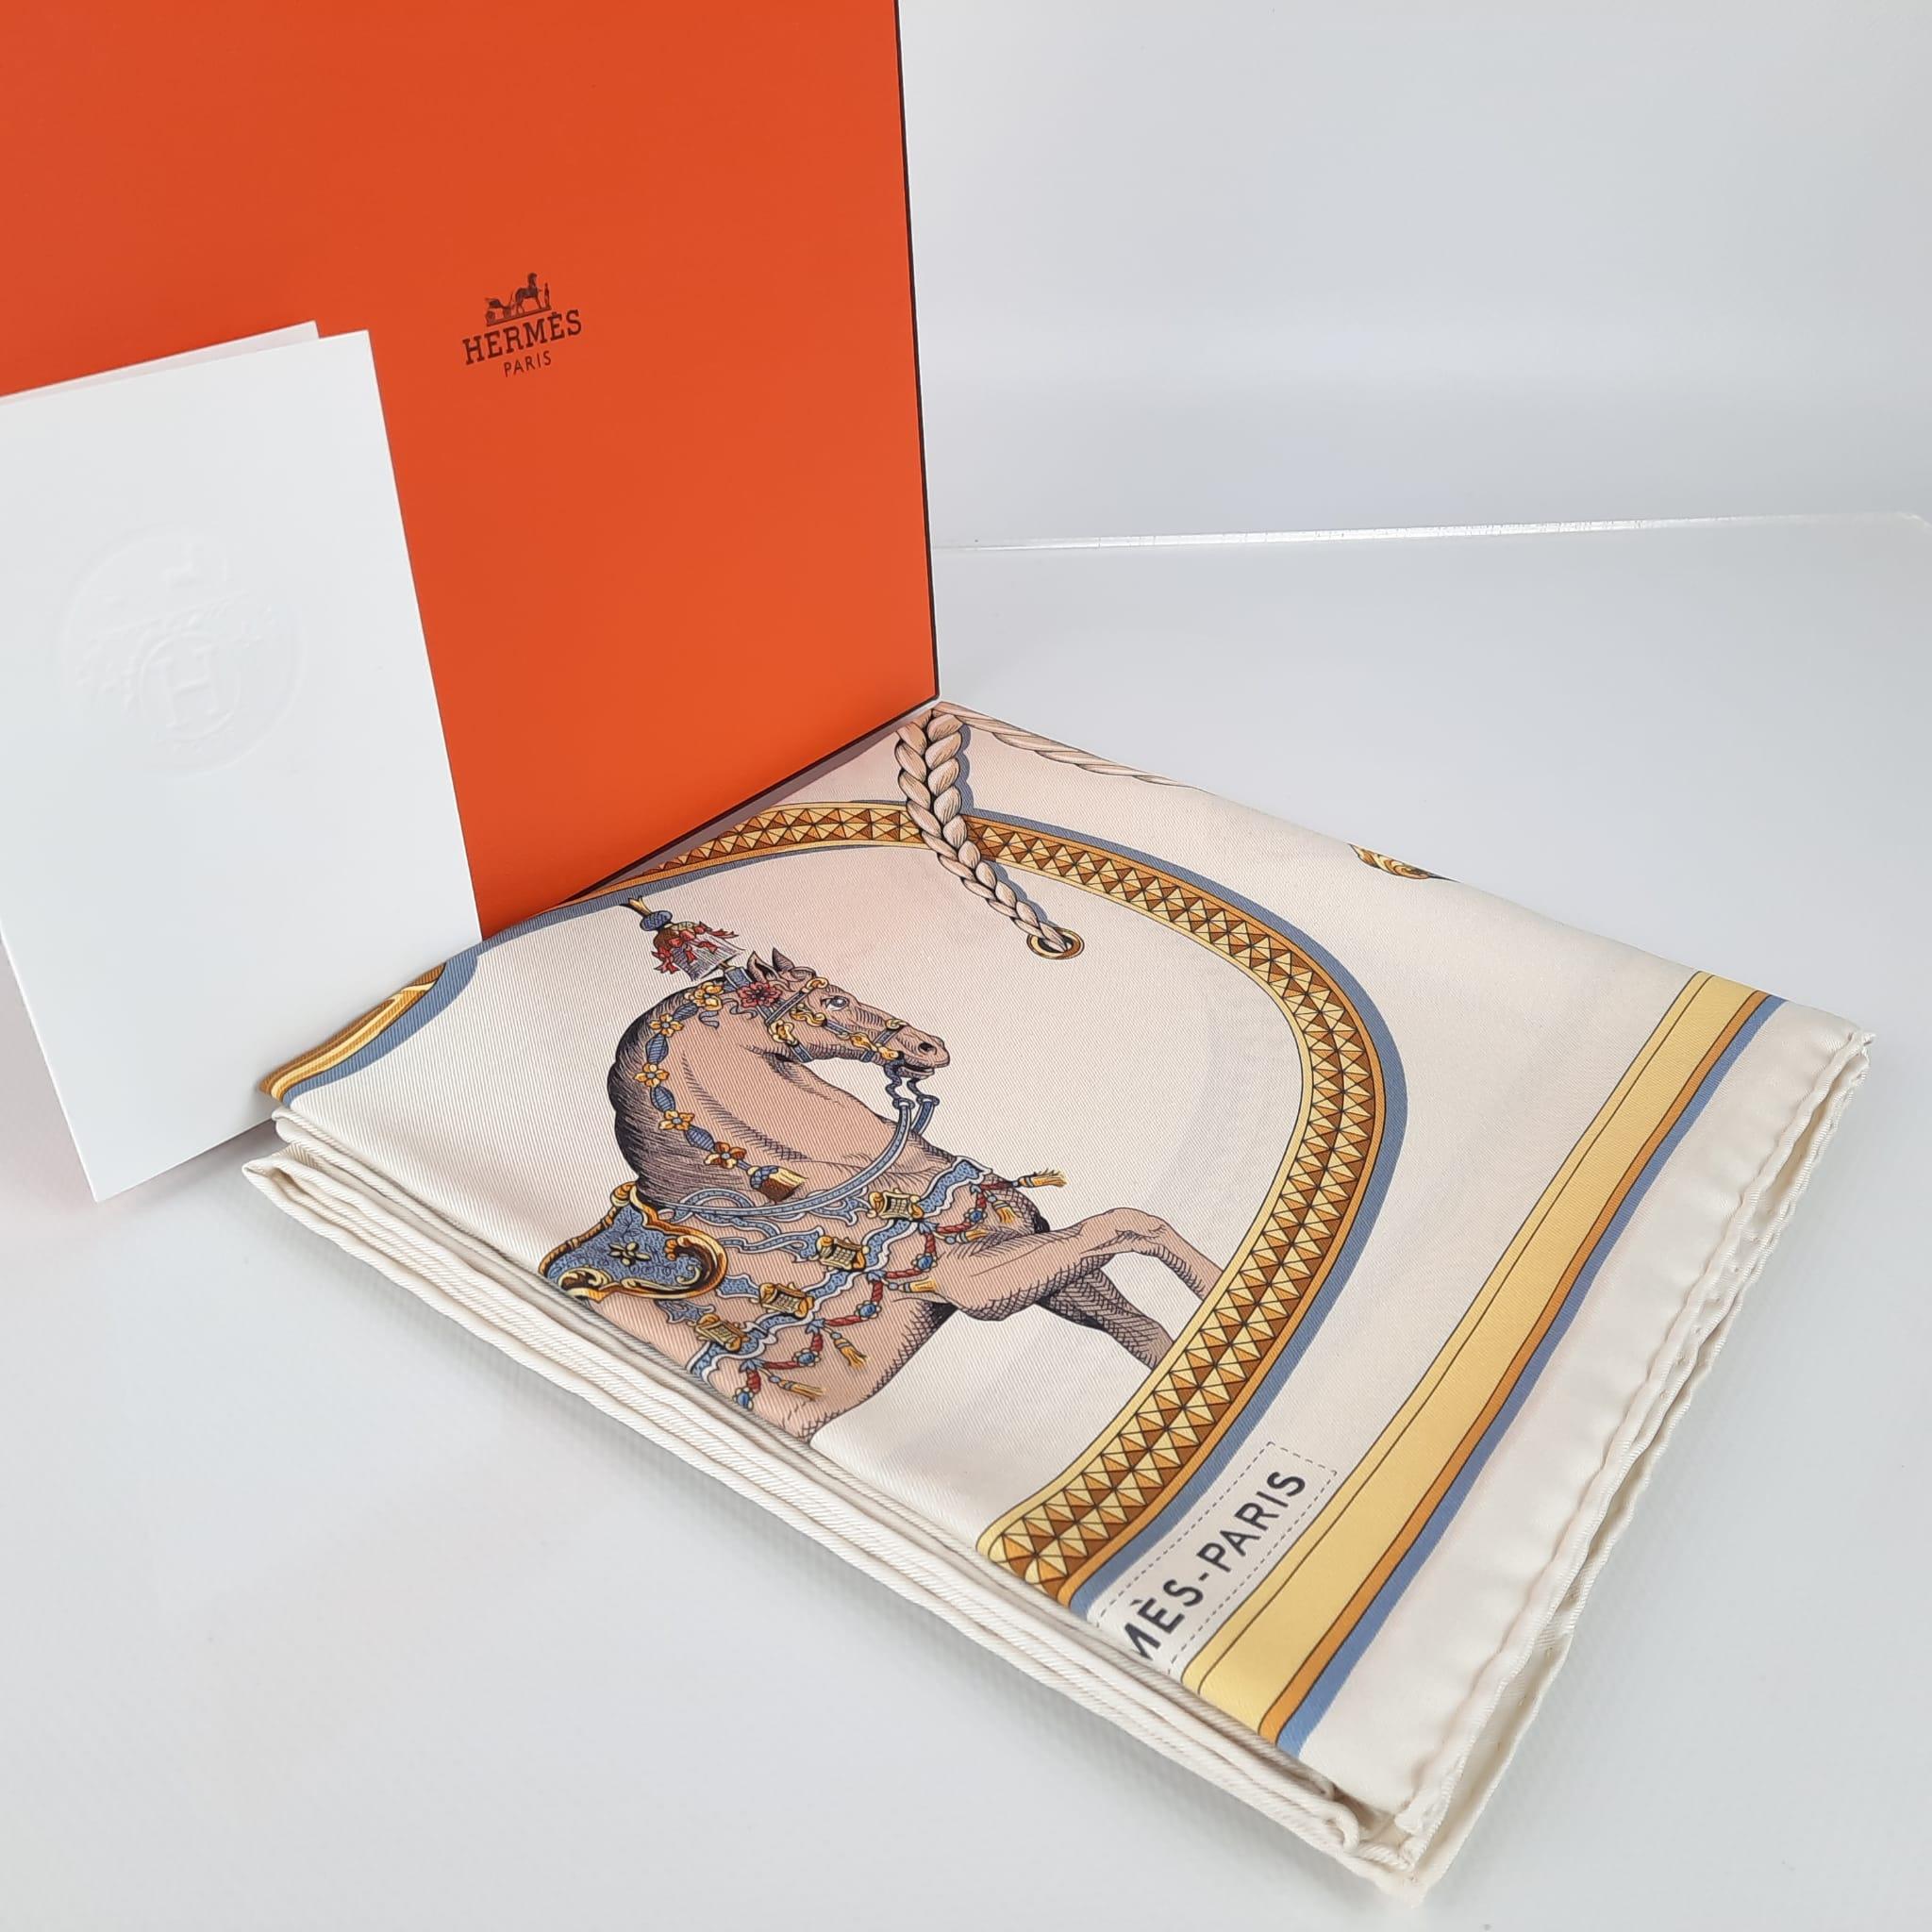 Hermes Crème / Gold / Multicolore Grand Apparat forever scarf 90 2